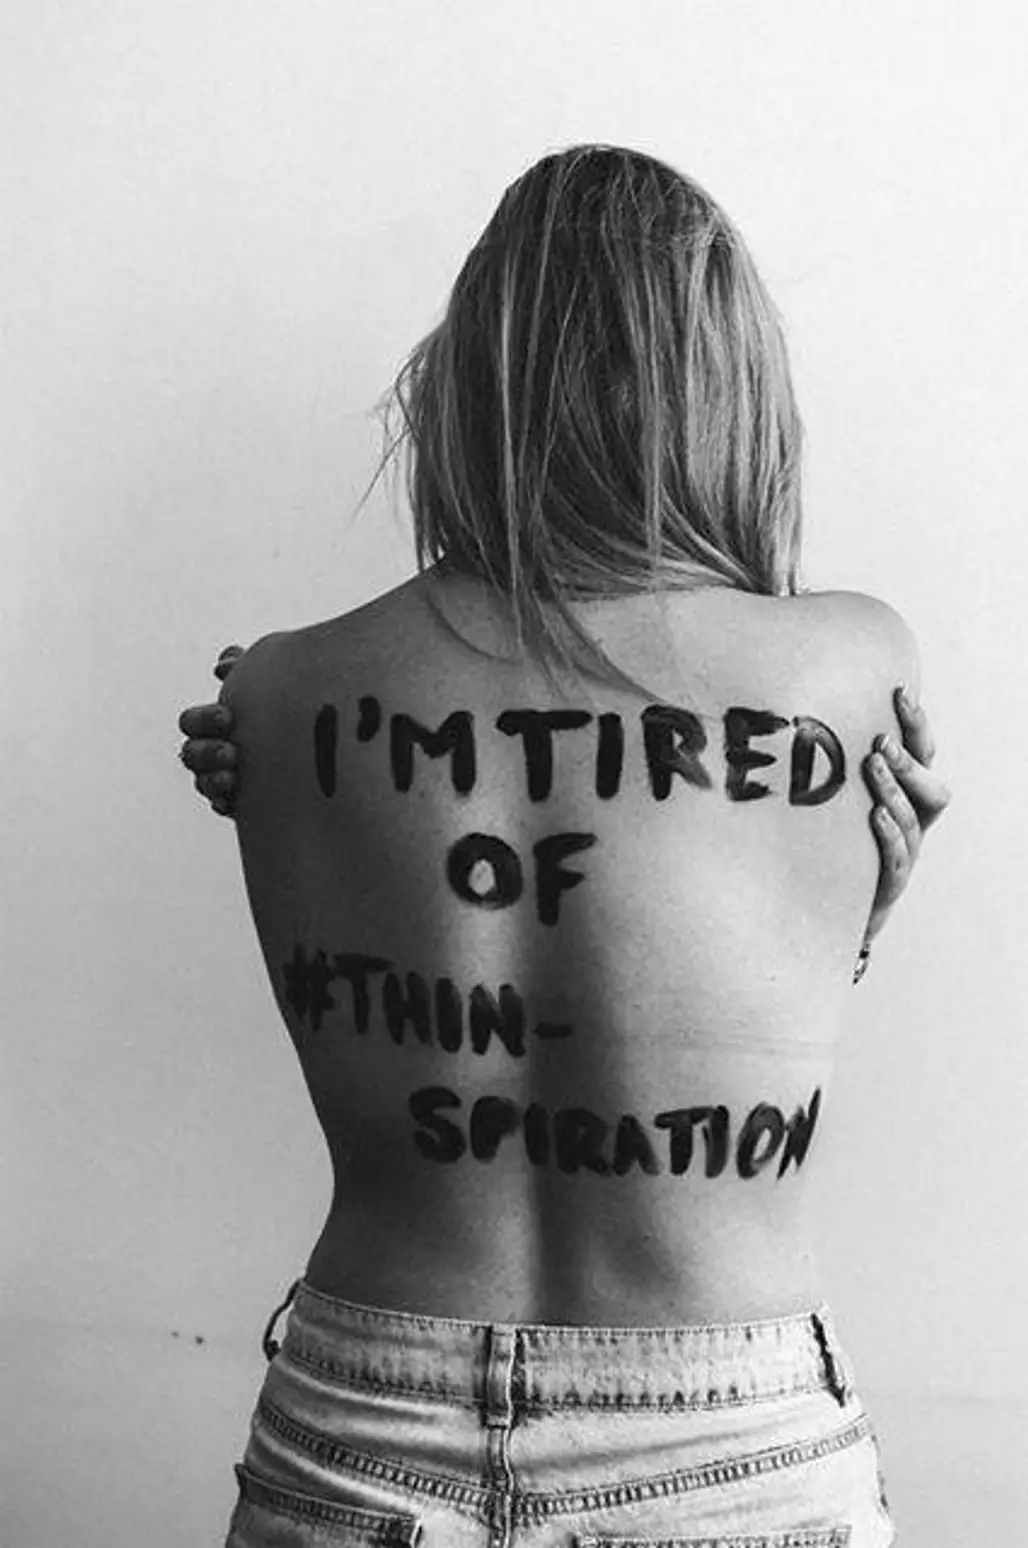 I'm Tired of #thin-spiration